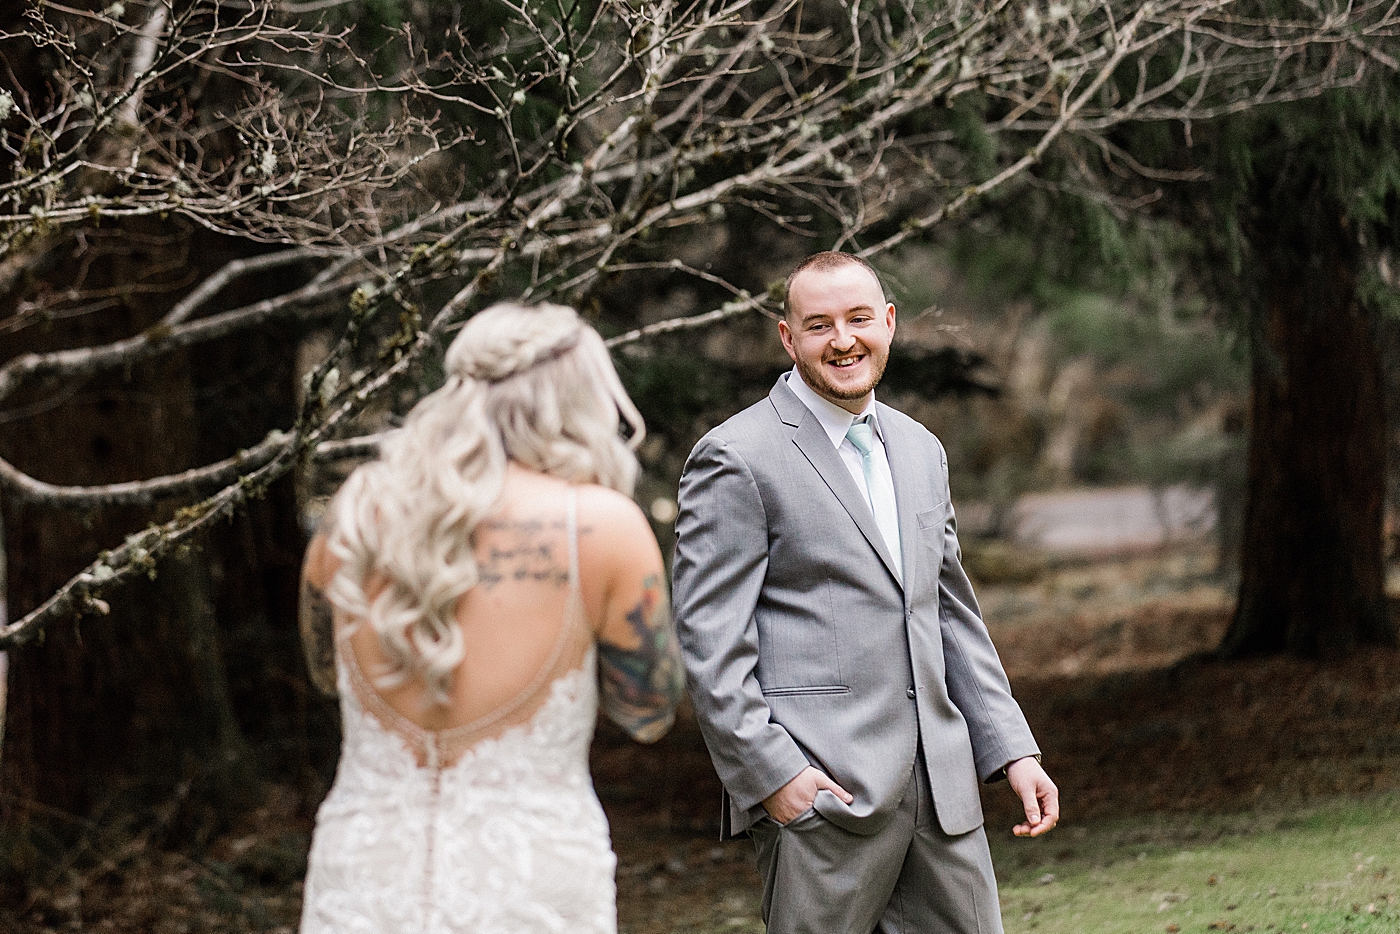 First look between bride and groom. Photo by Megan Montalvo Photography.